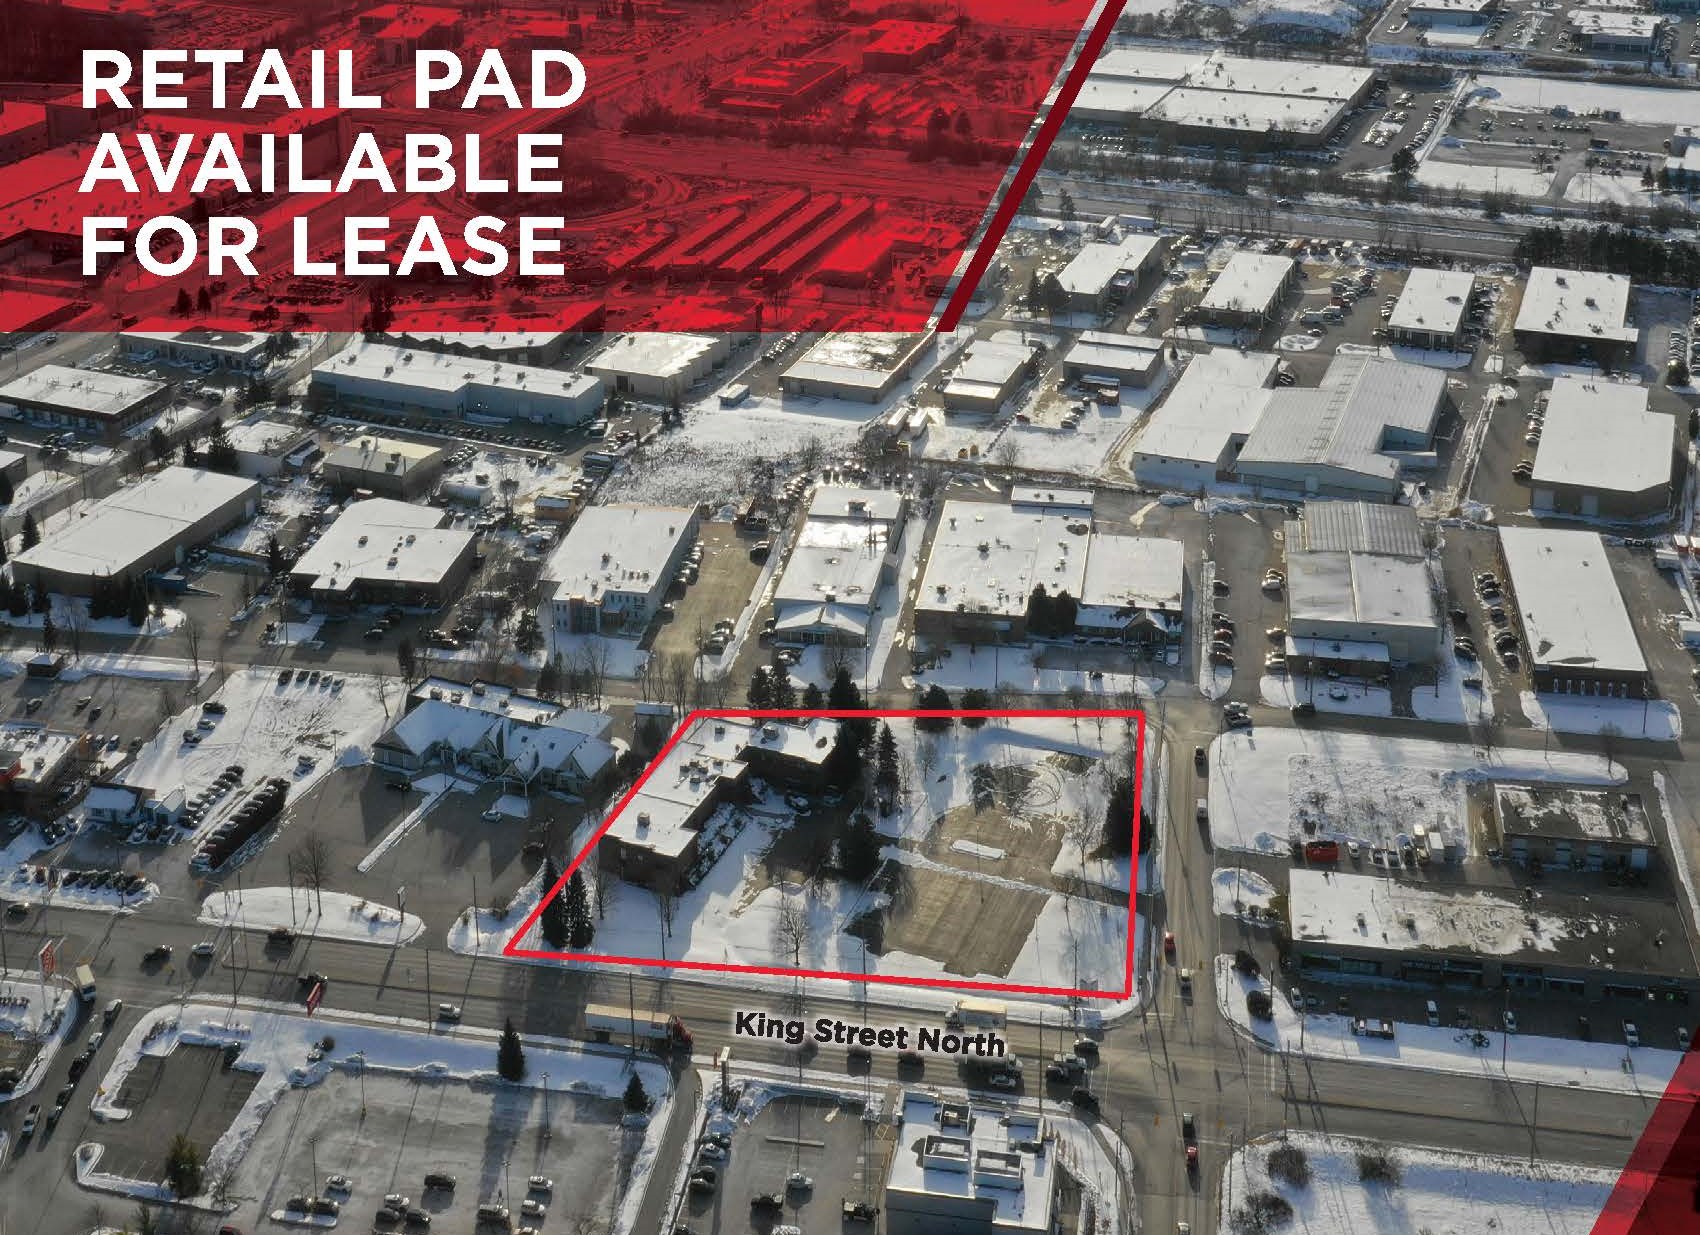 651 Colby Drive, Waterloo, ON | Retail Pad Available For Lease